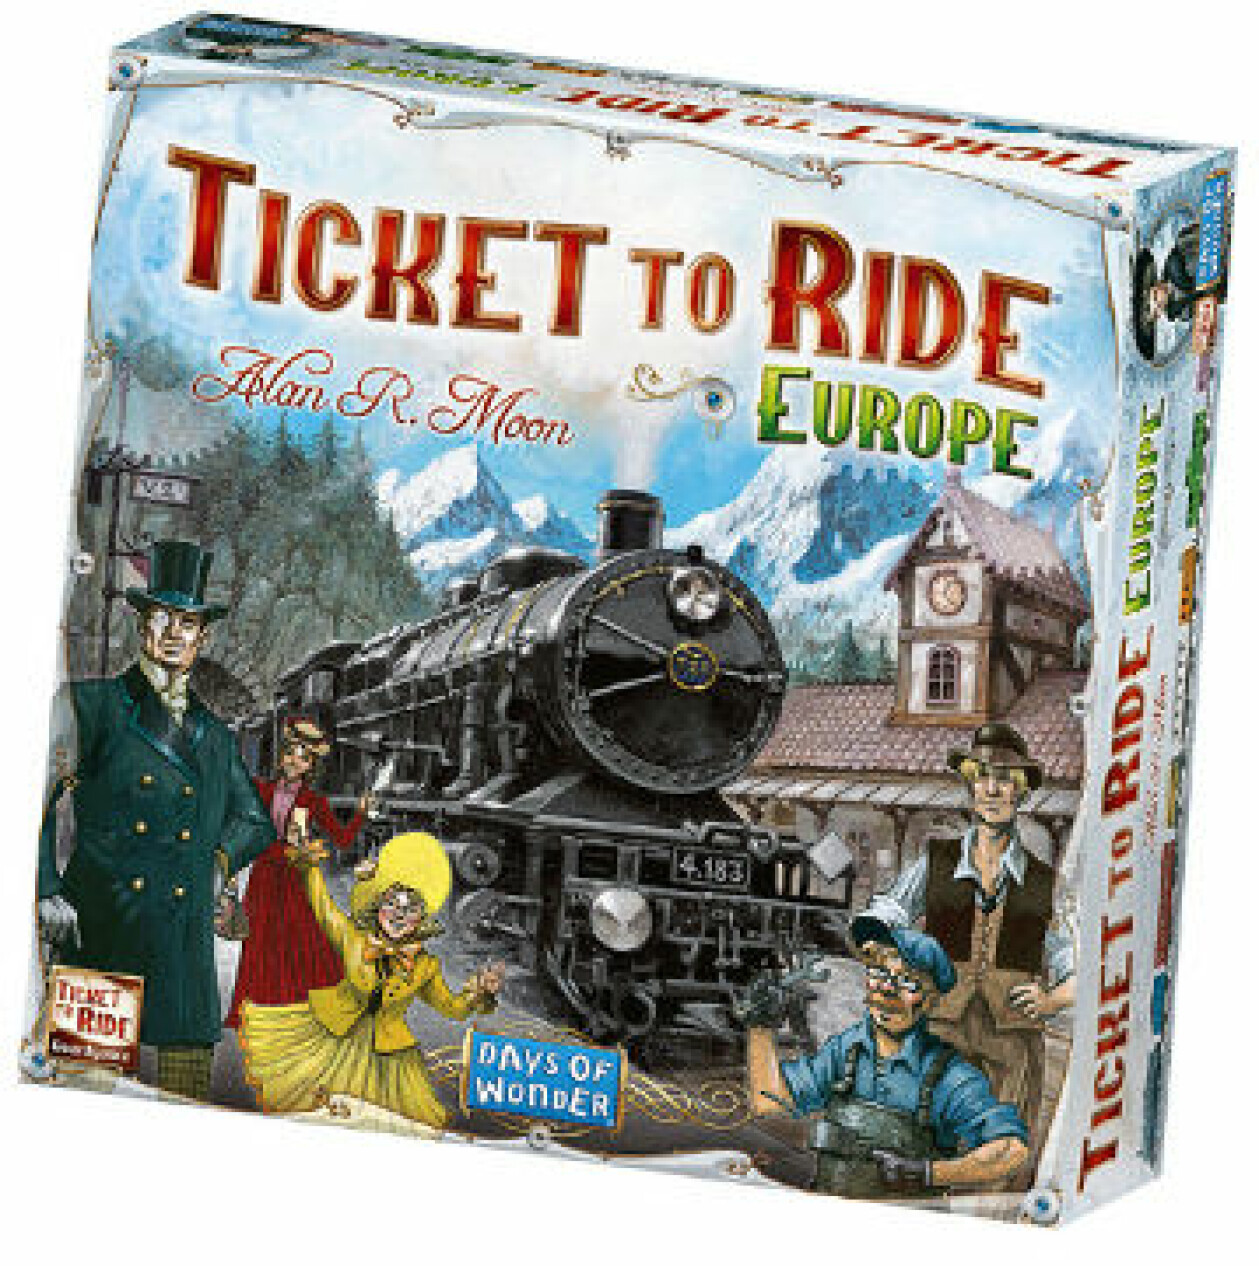 Ticket to ride